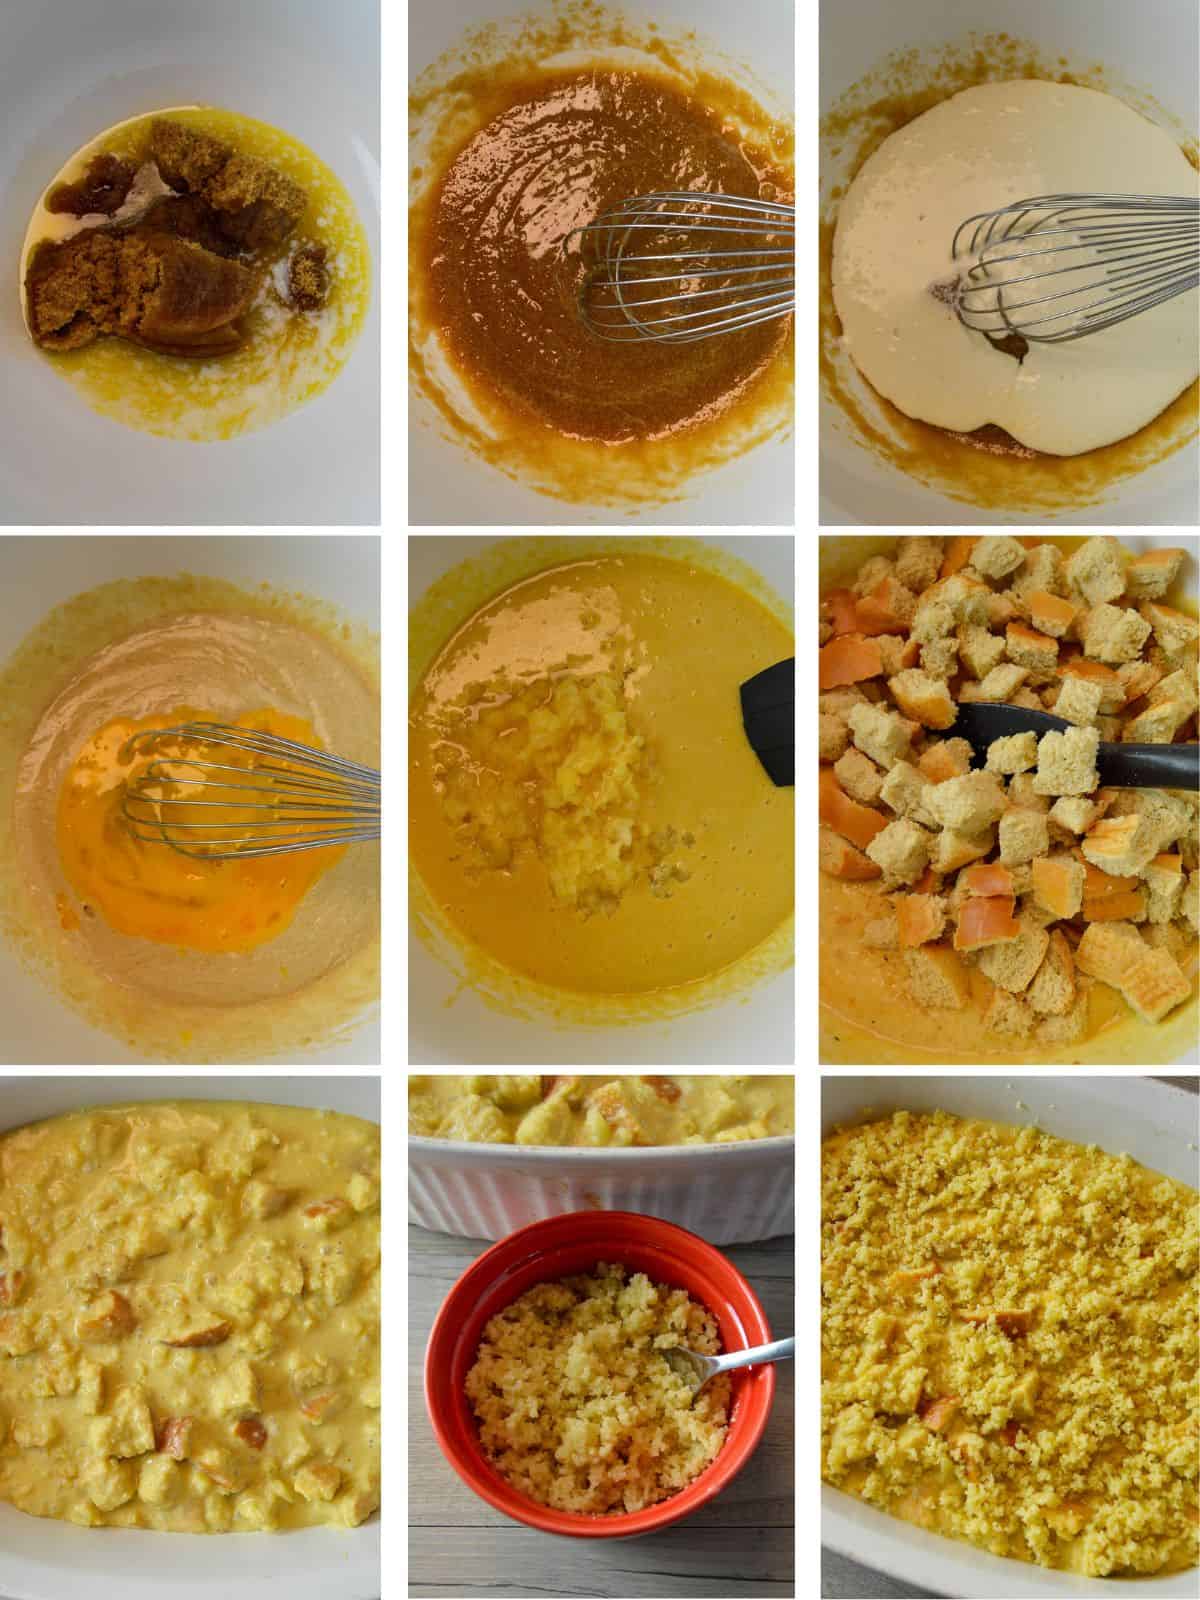 9 image collage showing steps to make scalloped pineapple casserole